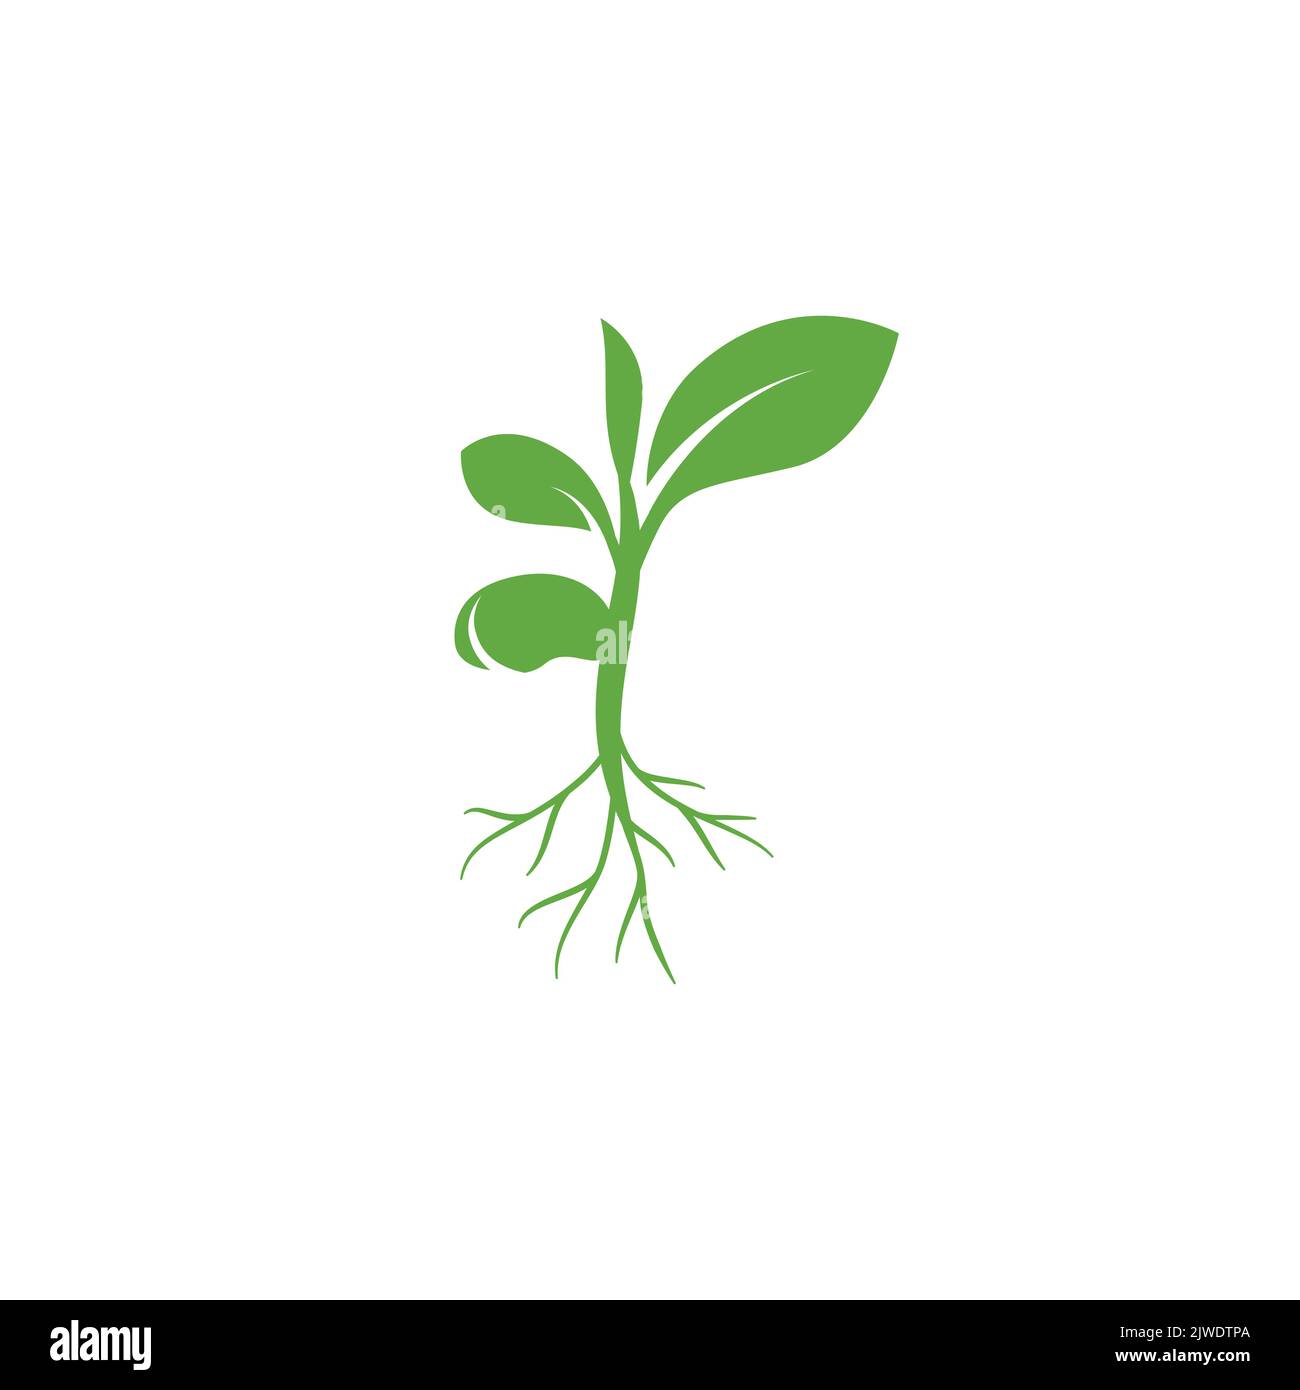 Sprout eco logo icon. Green leaf seedling icon symbol. Growing plant design concept. Eco icon theme. Ecology icon. seed growing icon. Vector illustration Stock Vector